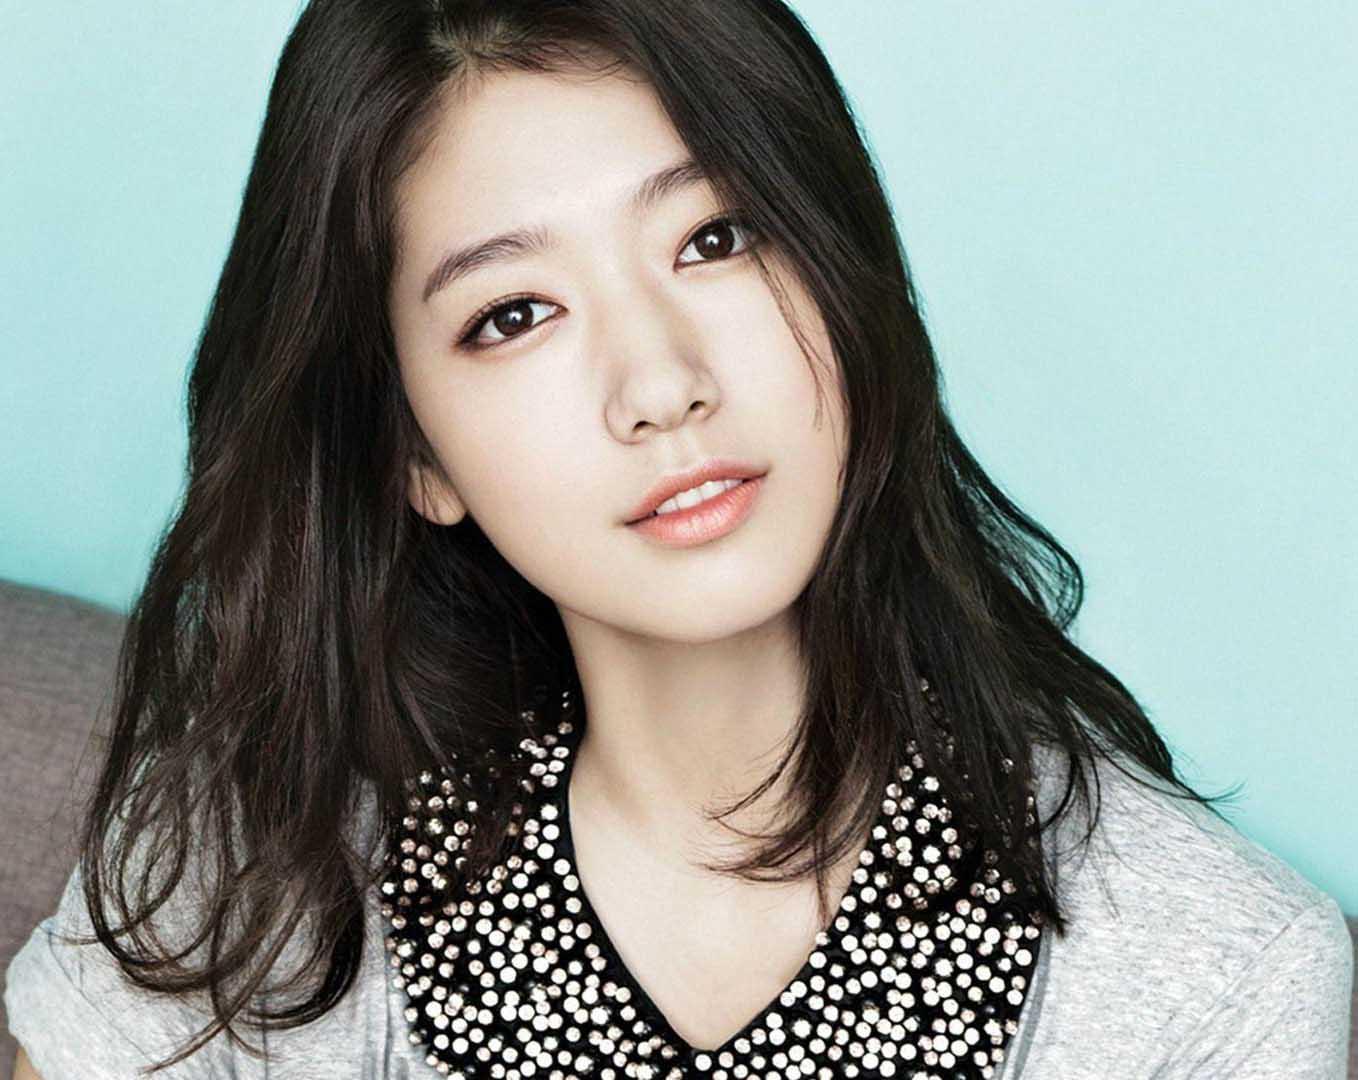 Park Shin Hye Wallpapers HD 2019 for Android - APK Download